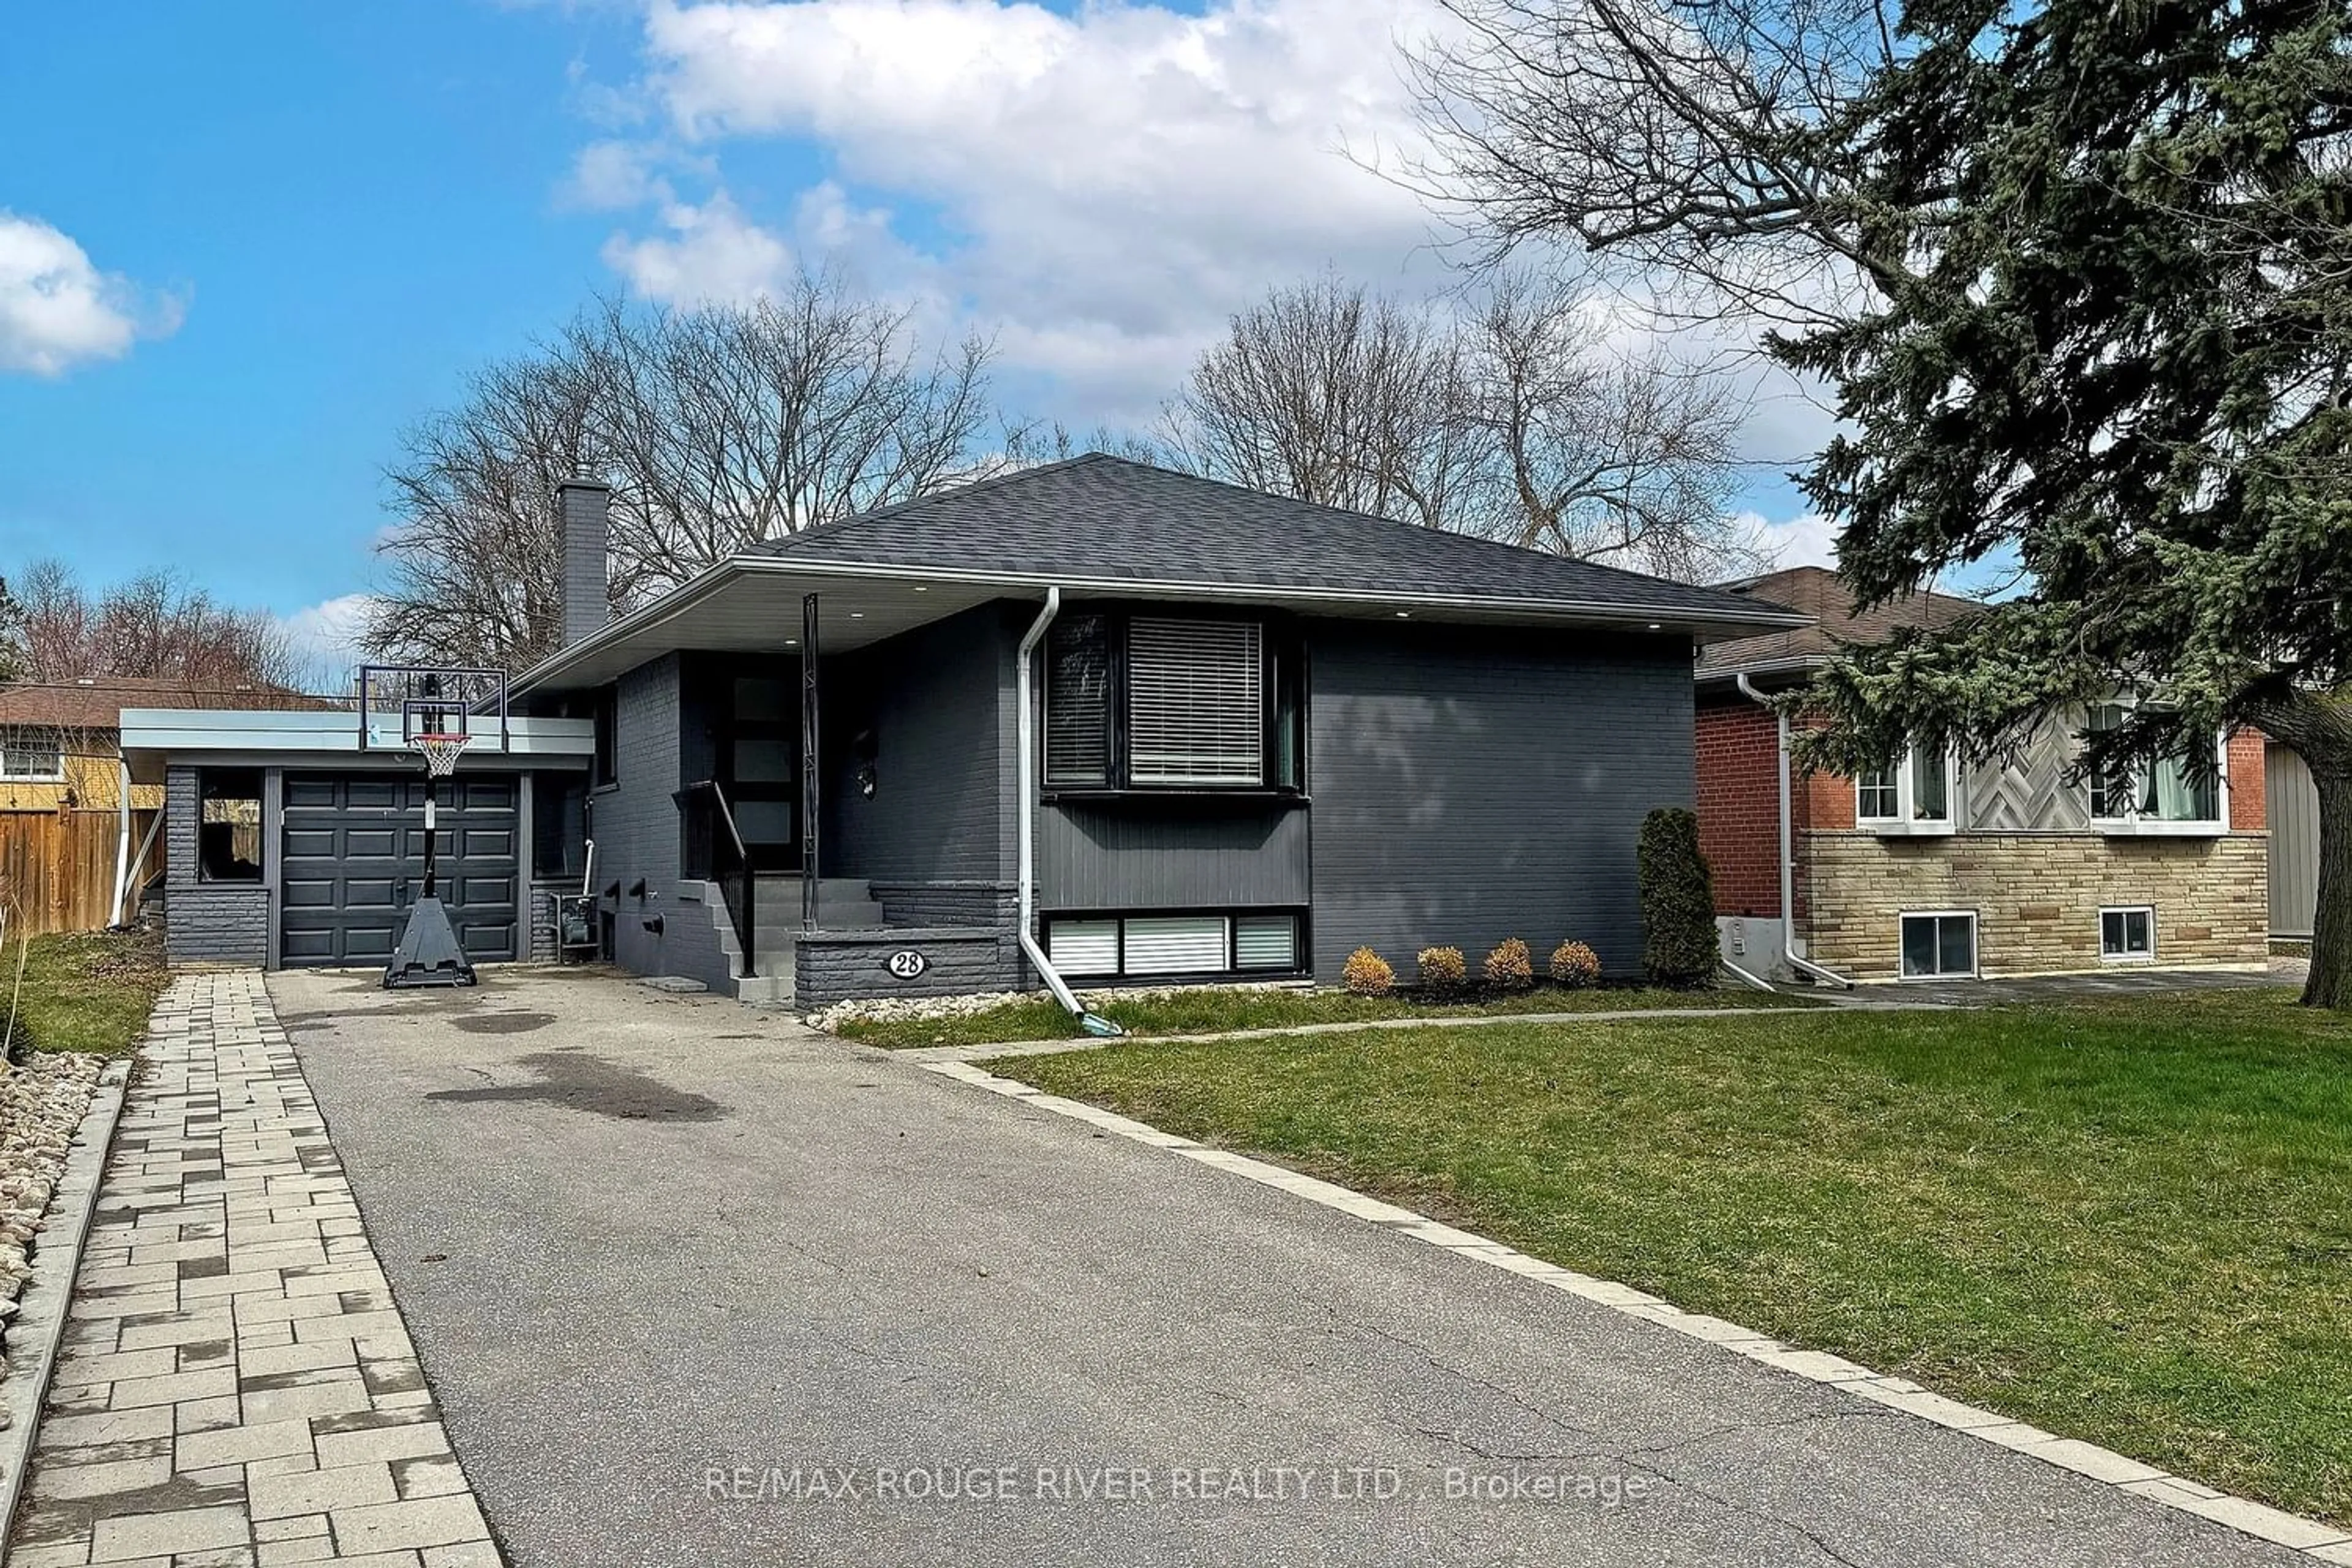 Frontside or backside of a home for 28 Nuffield Dr, Toronto Ontario M1E 1H4